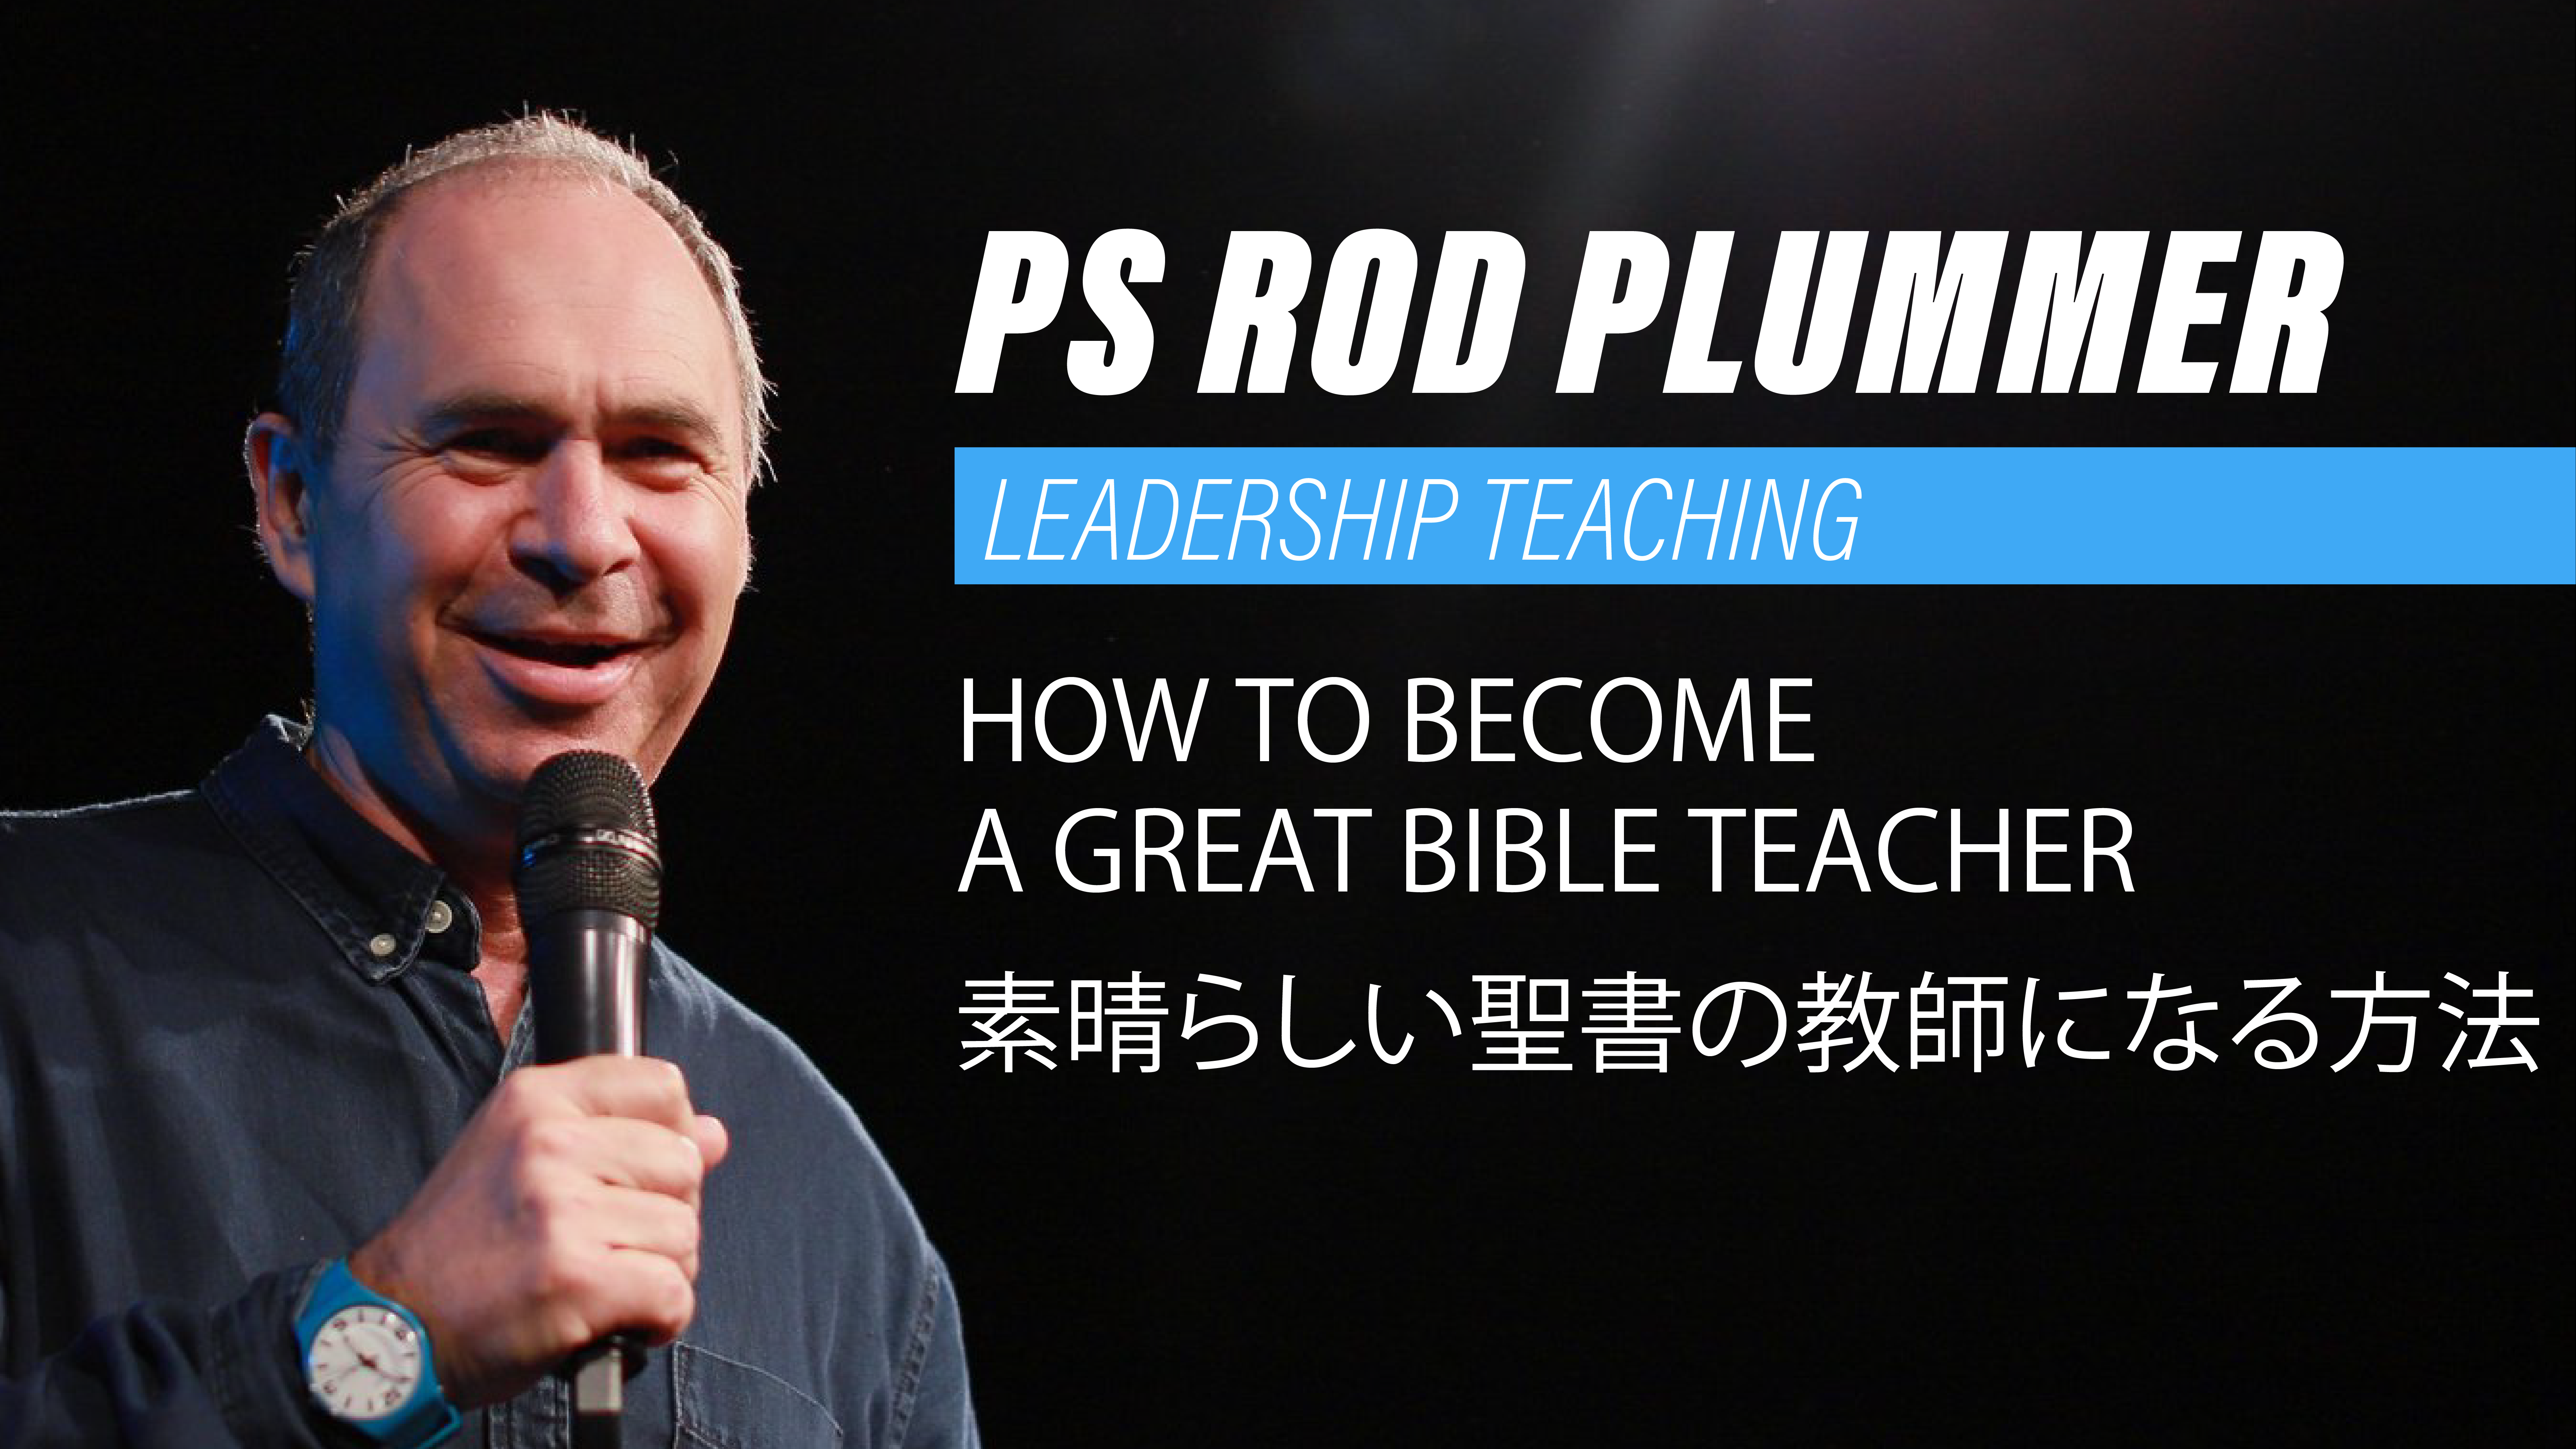 Featured image for “How to Become a Great Bible Teacher ”